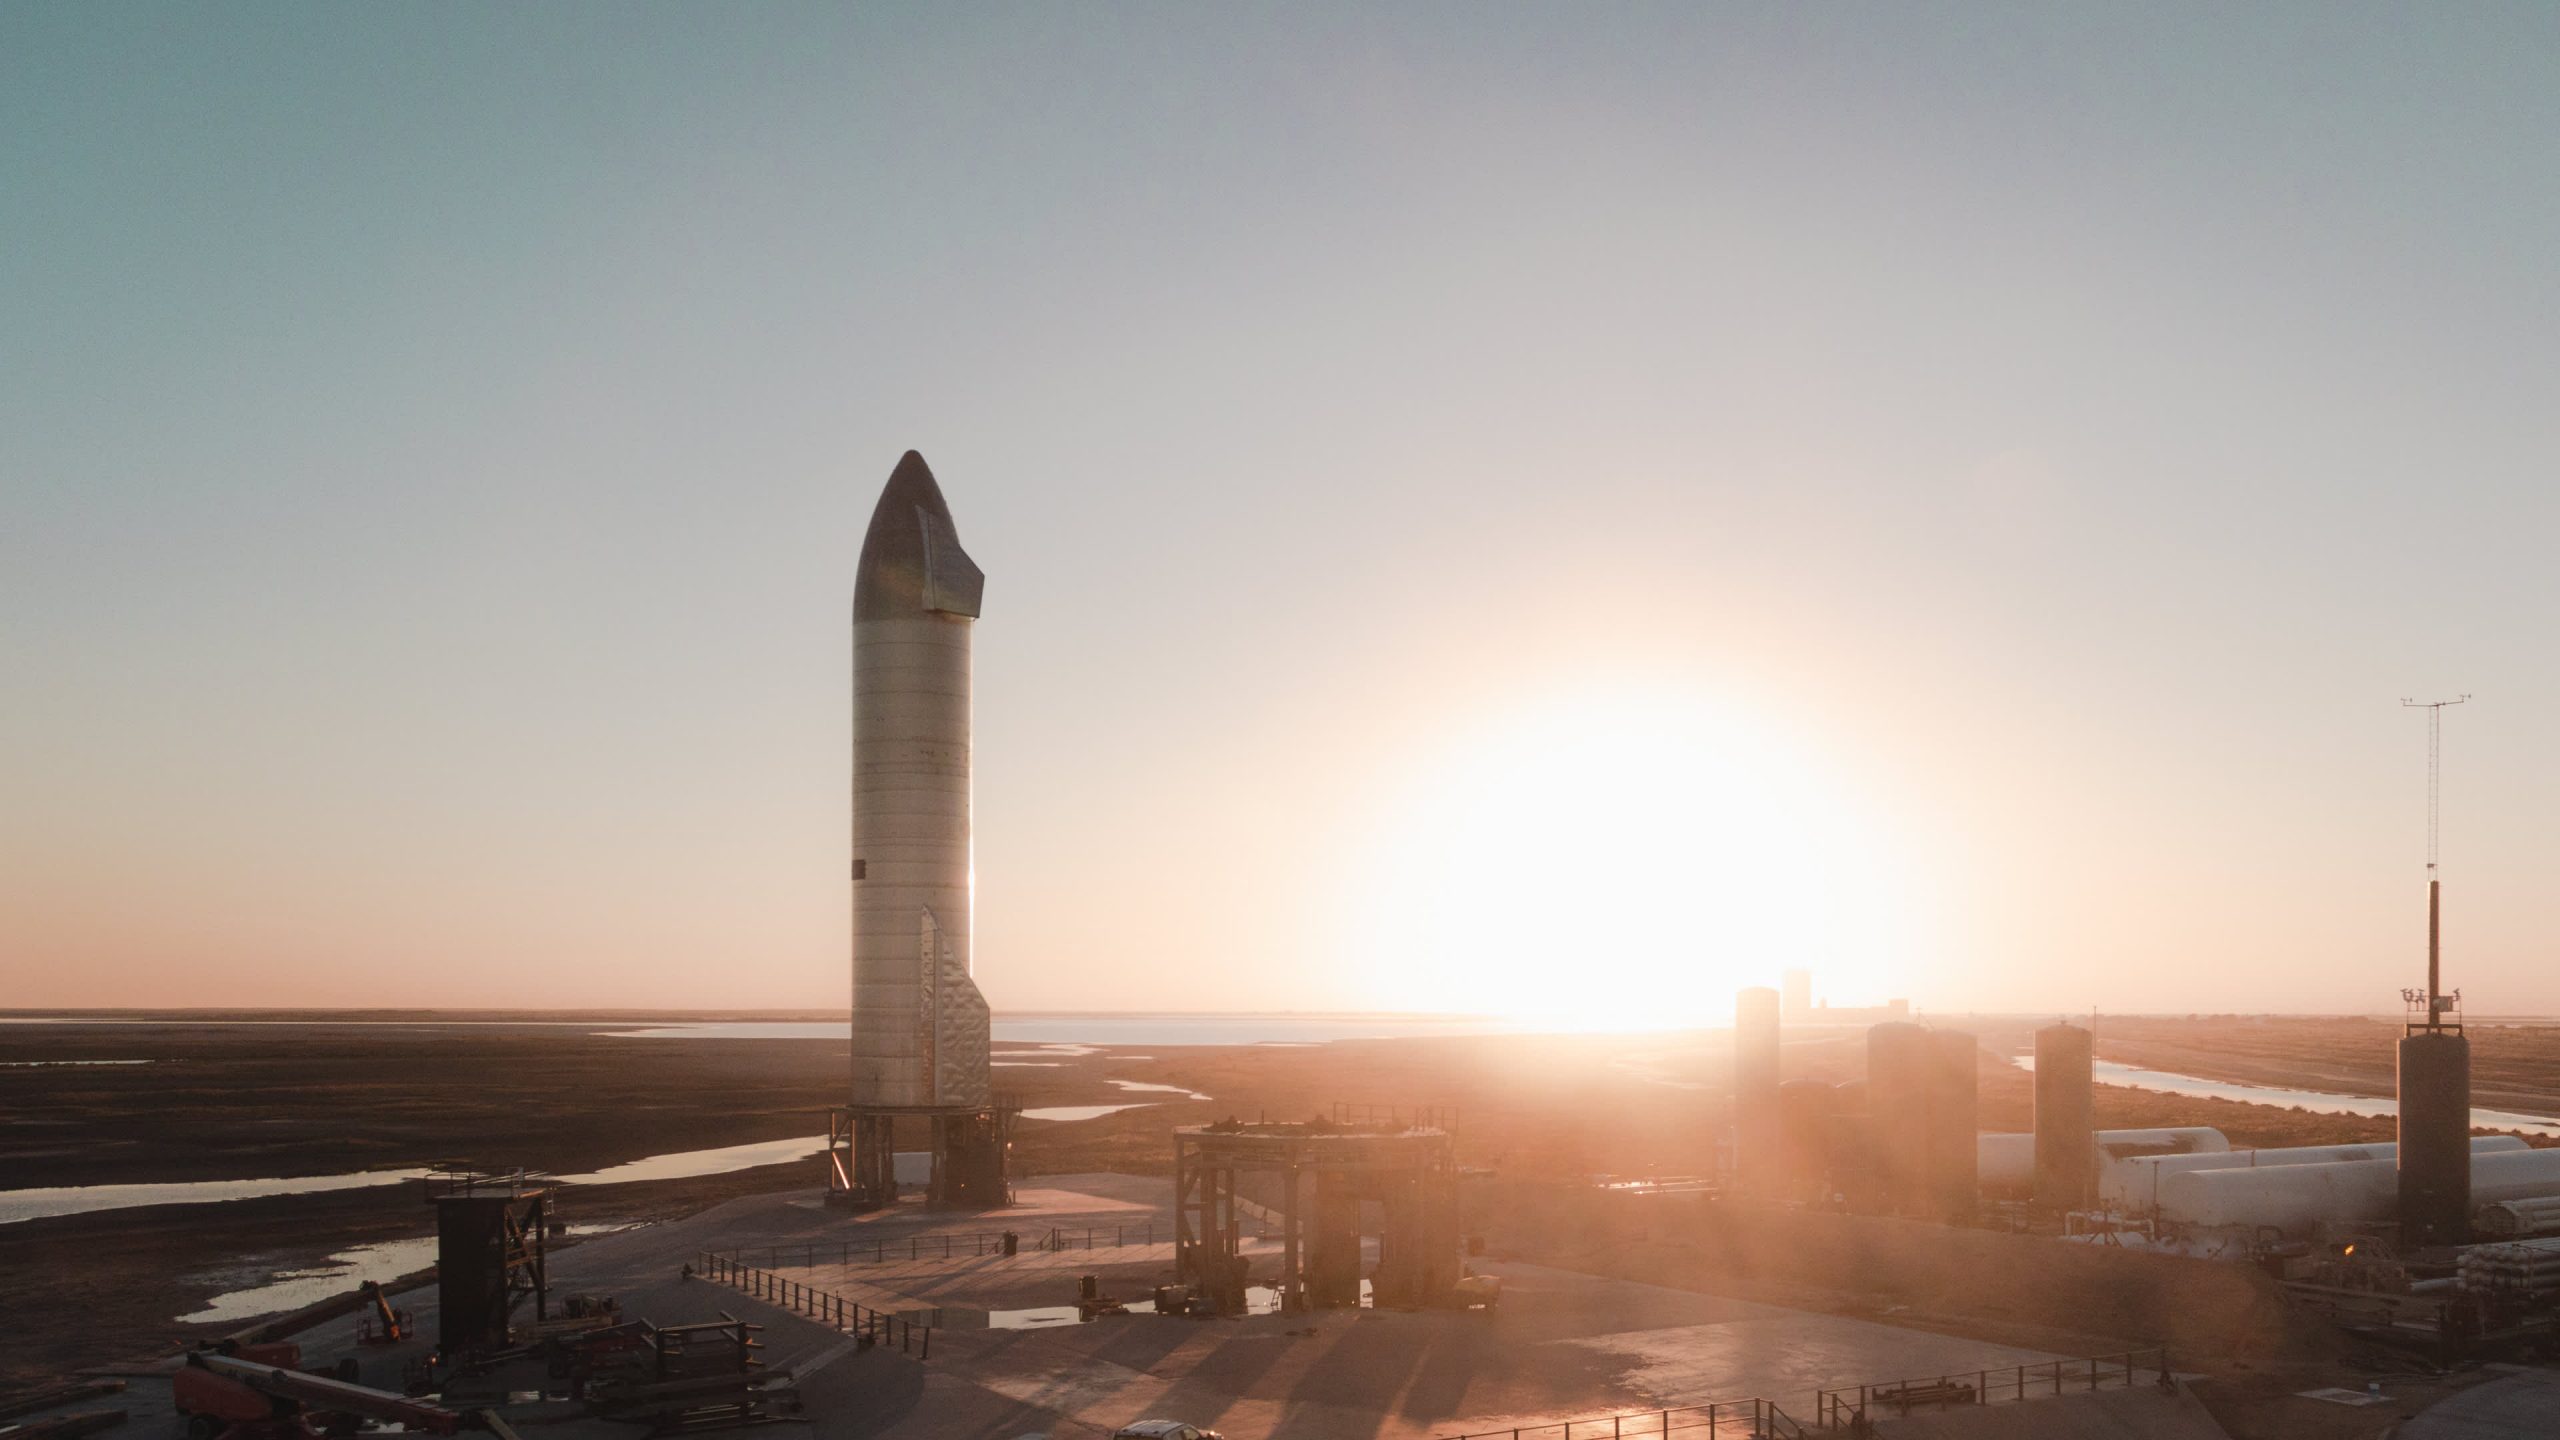 Watch SpaceX try and launch and land Starship prototype rocket SN9